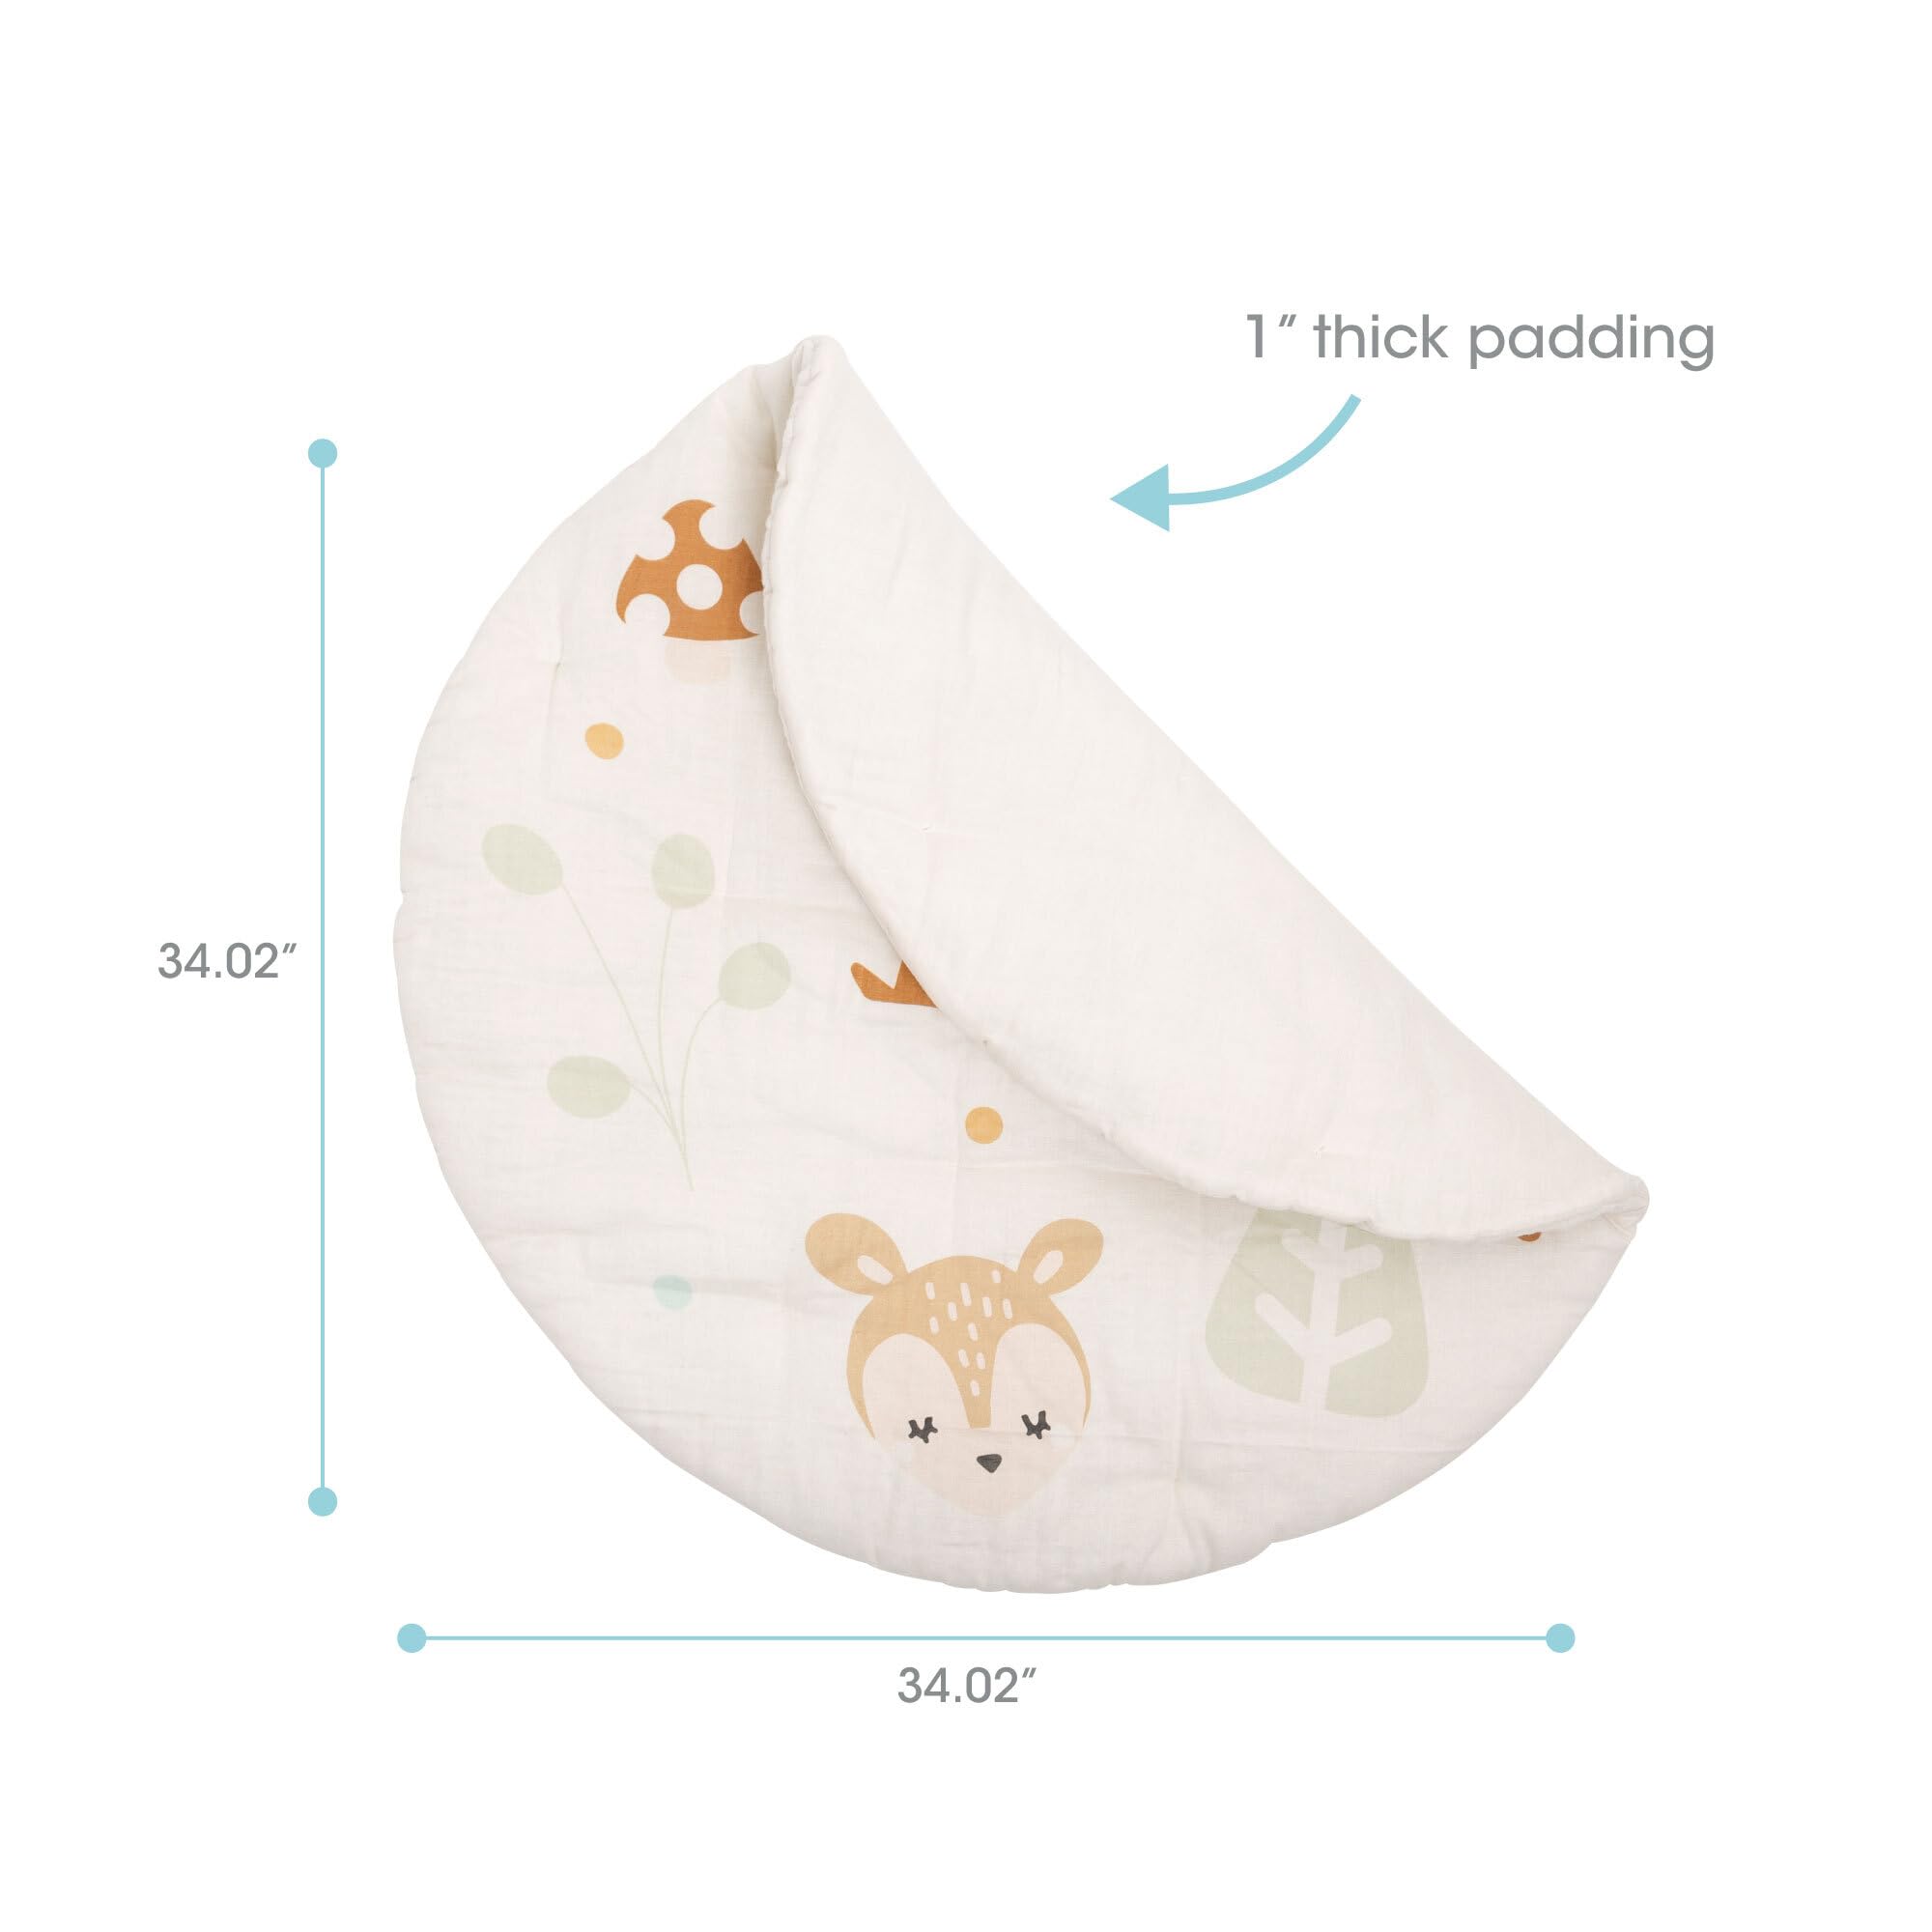 Pearhead Woodland Plush Play Mat, Portable and Washable Baby Tummy Time and Play Gym Mat, Gender Neutral Nursery Décor, Plush Cotton Play Mat